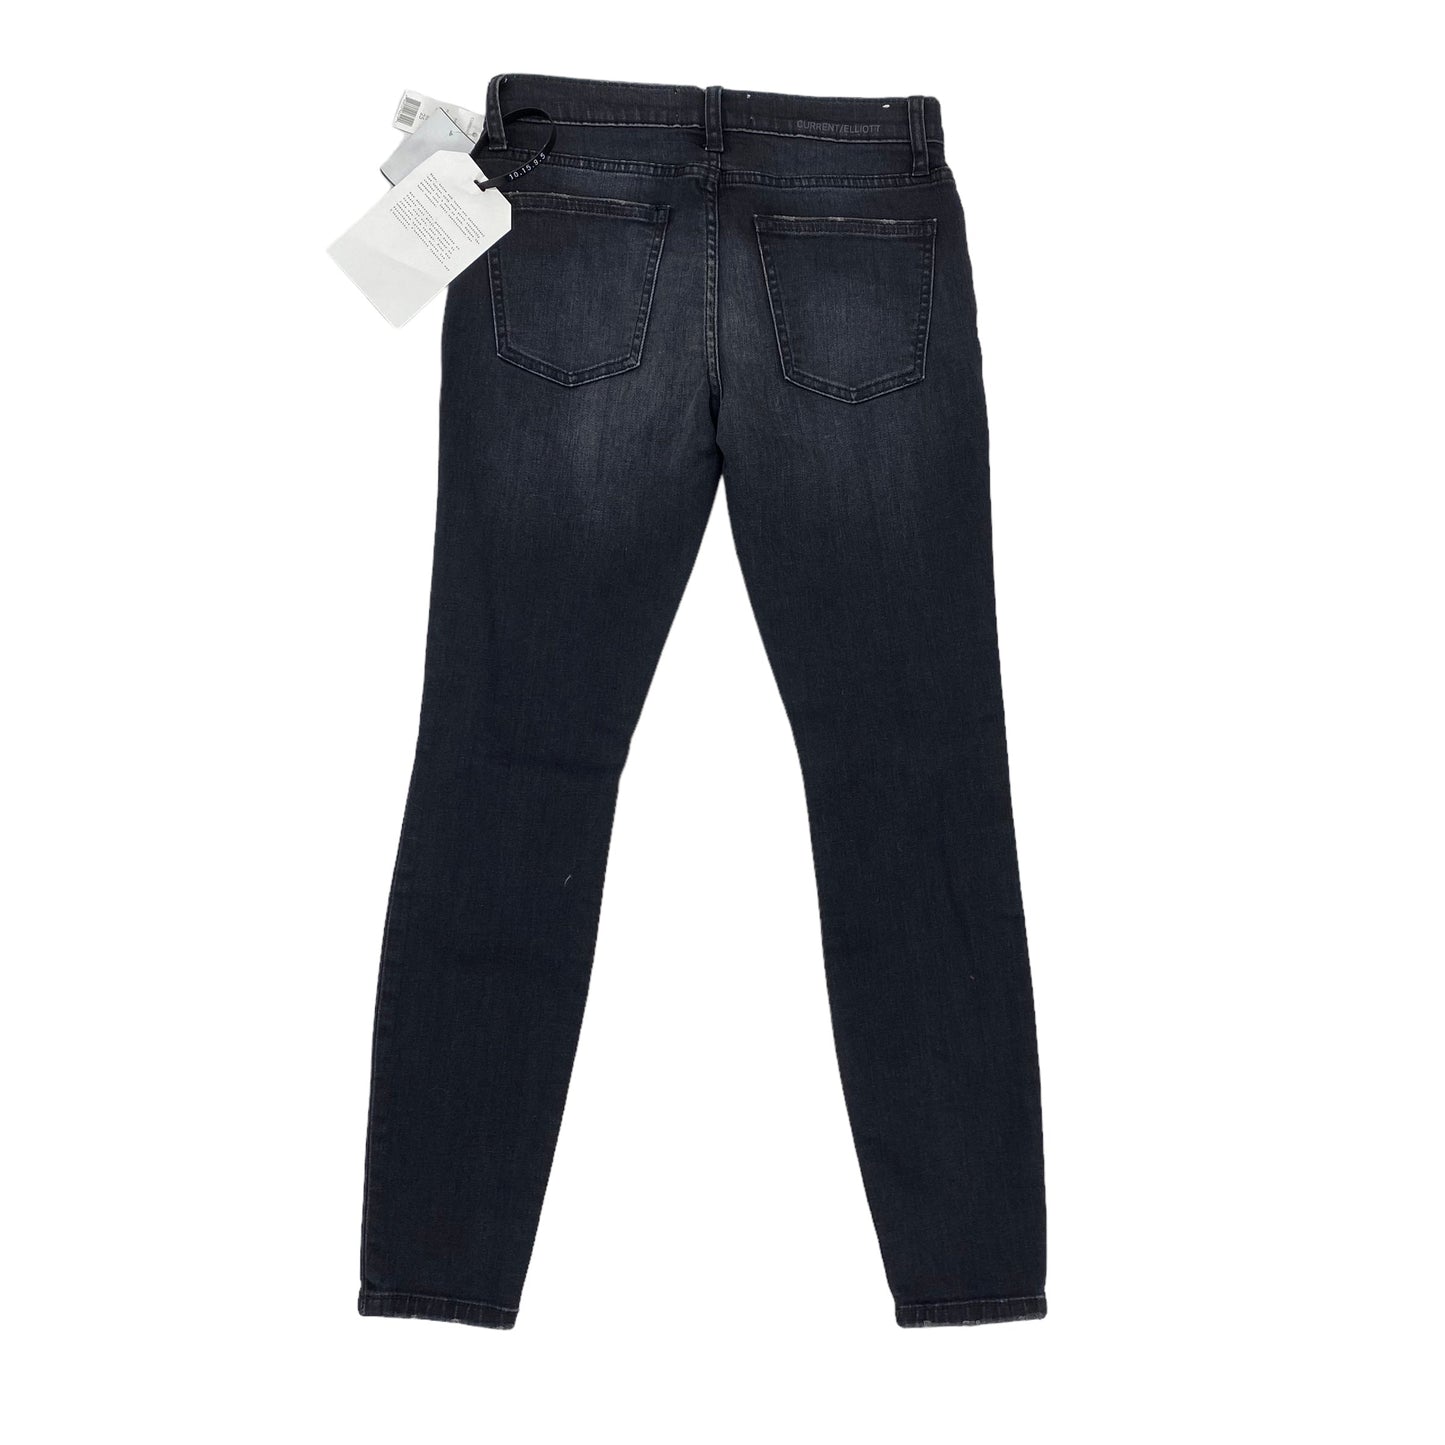 Jeans Skinny By Current/elliott  Size: 2